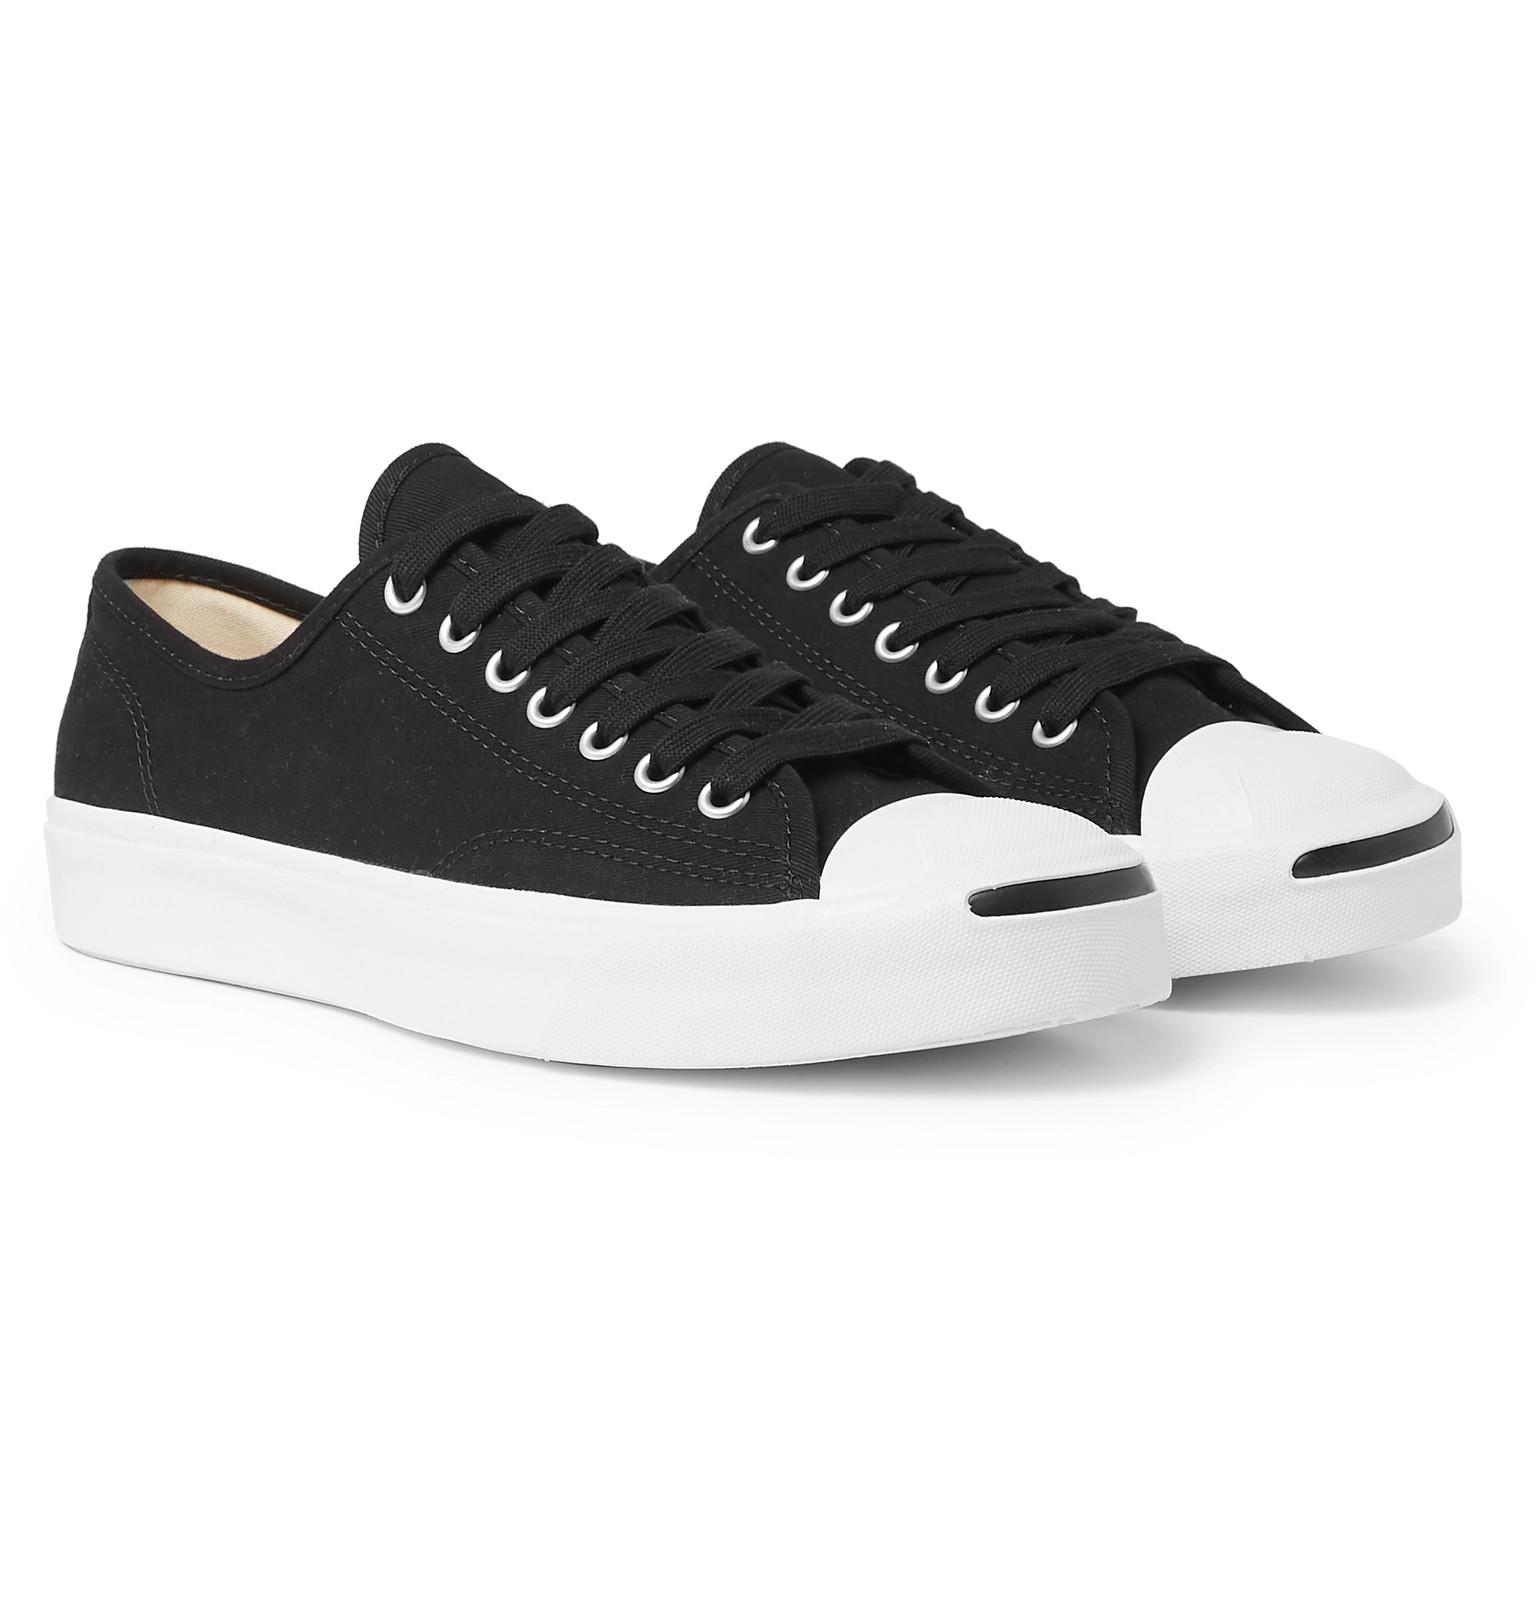 Converse Jack Purcell Ox Canvas Sneakers in Black for Men - Lyst